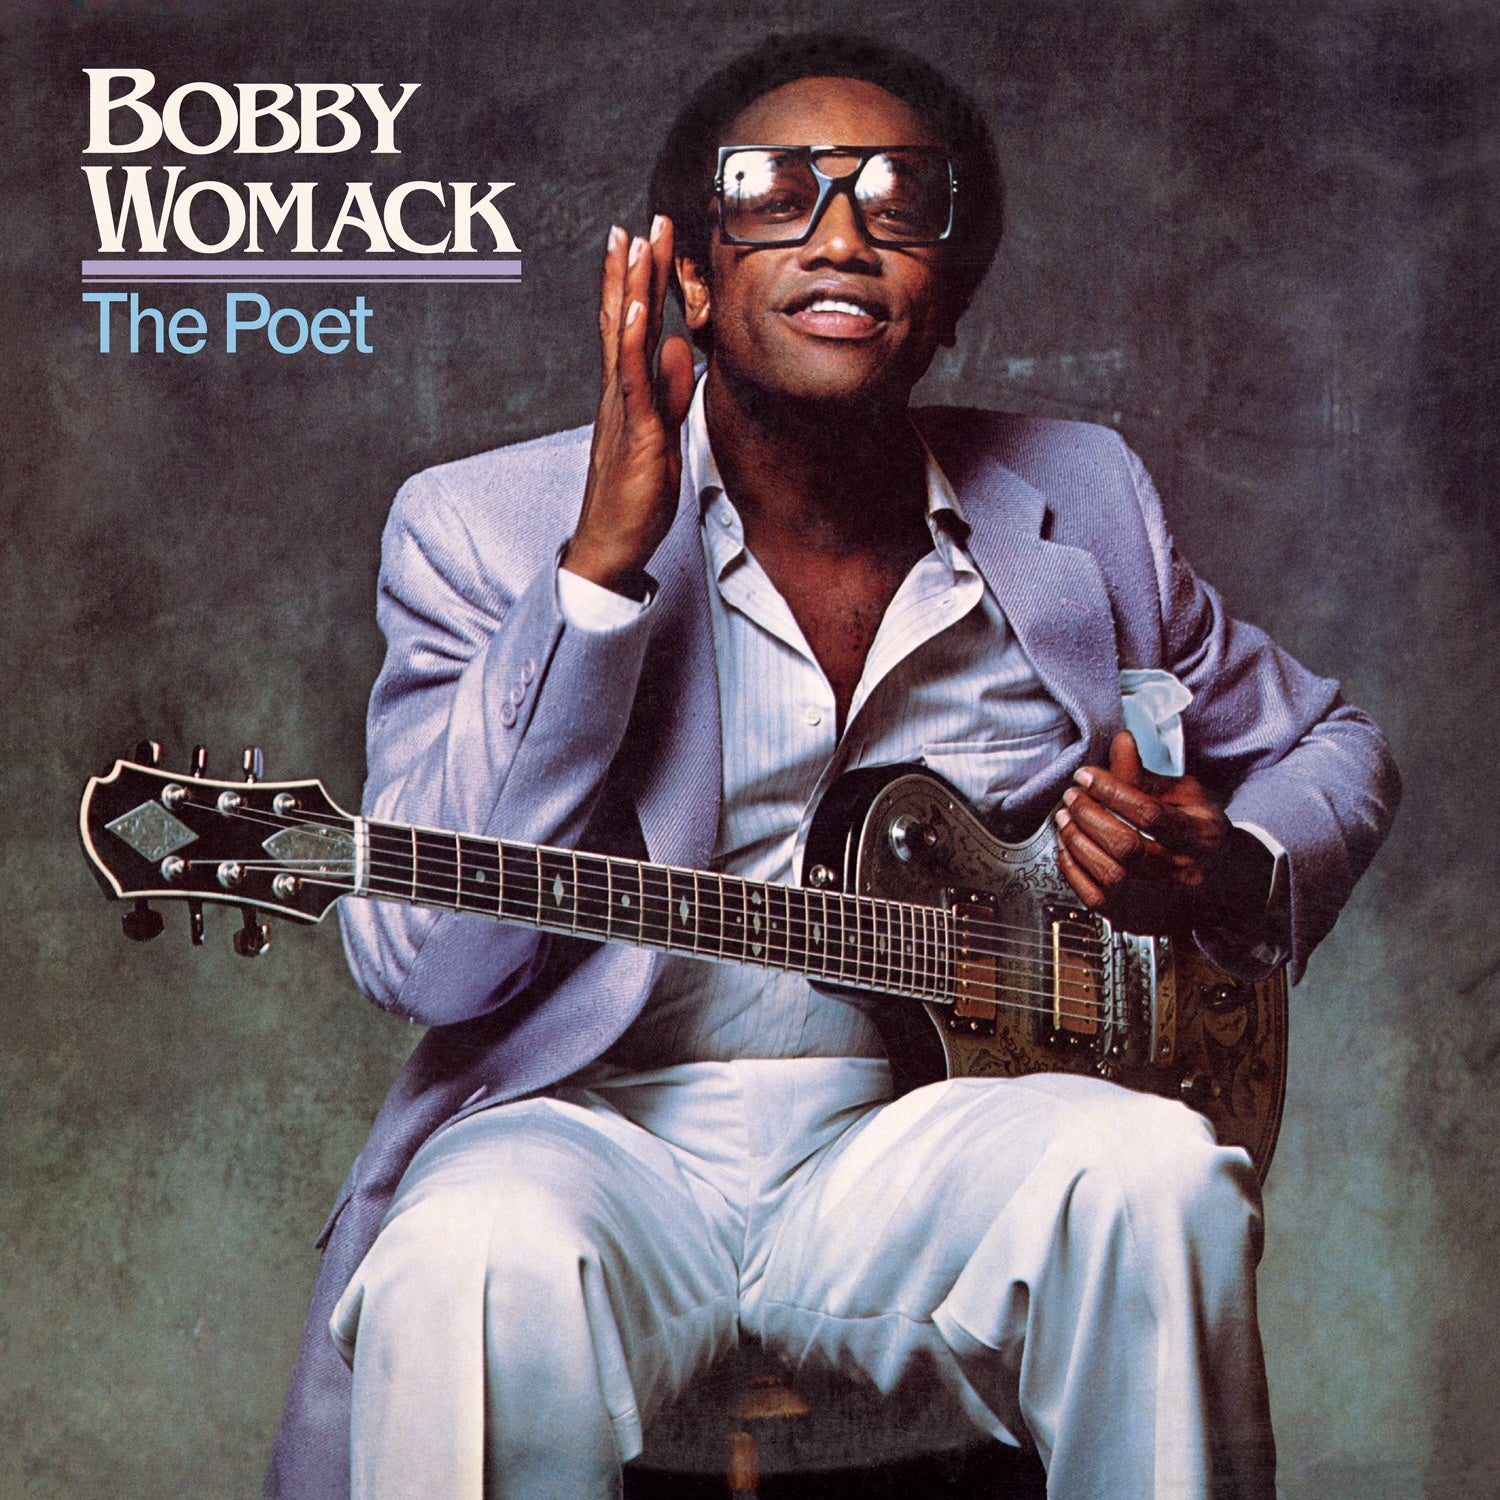 The Poet by Bobby Womack